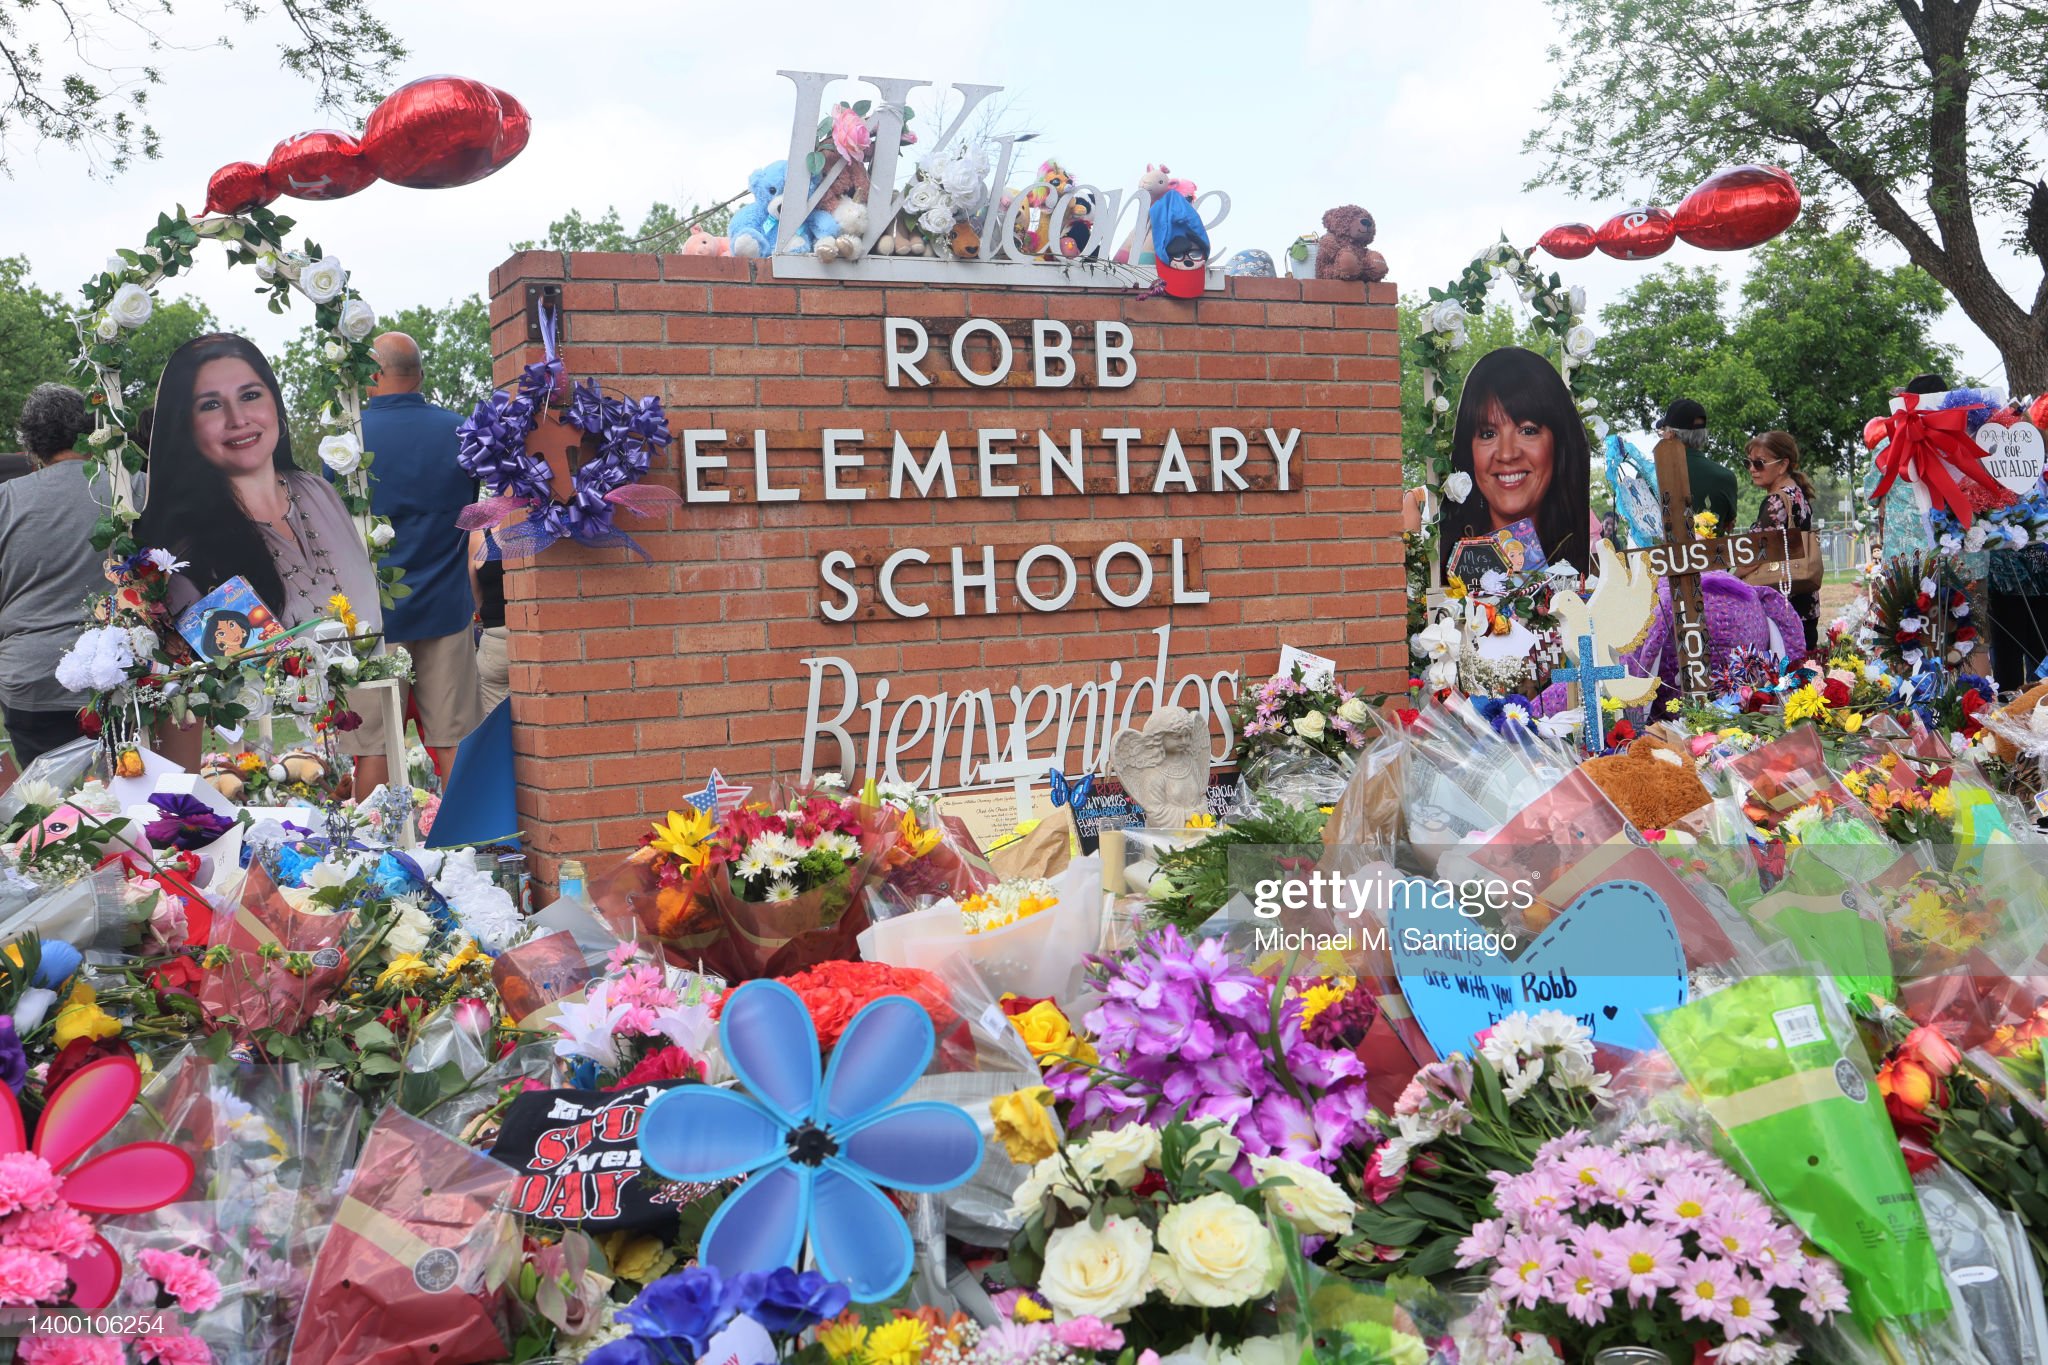 In Uvalde, Texas, 19 children and two adults were killed in a mass shooting at Robb Elementary School.